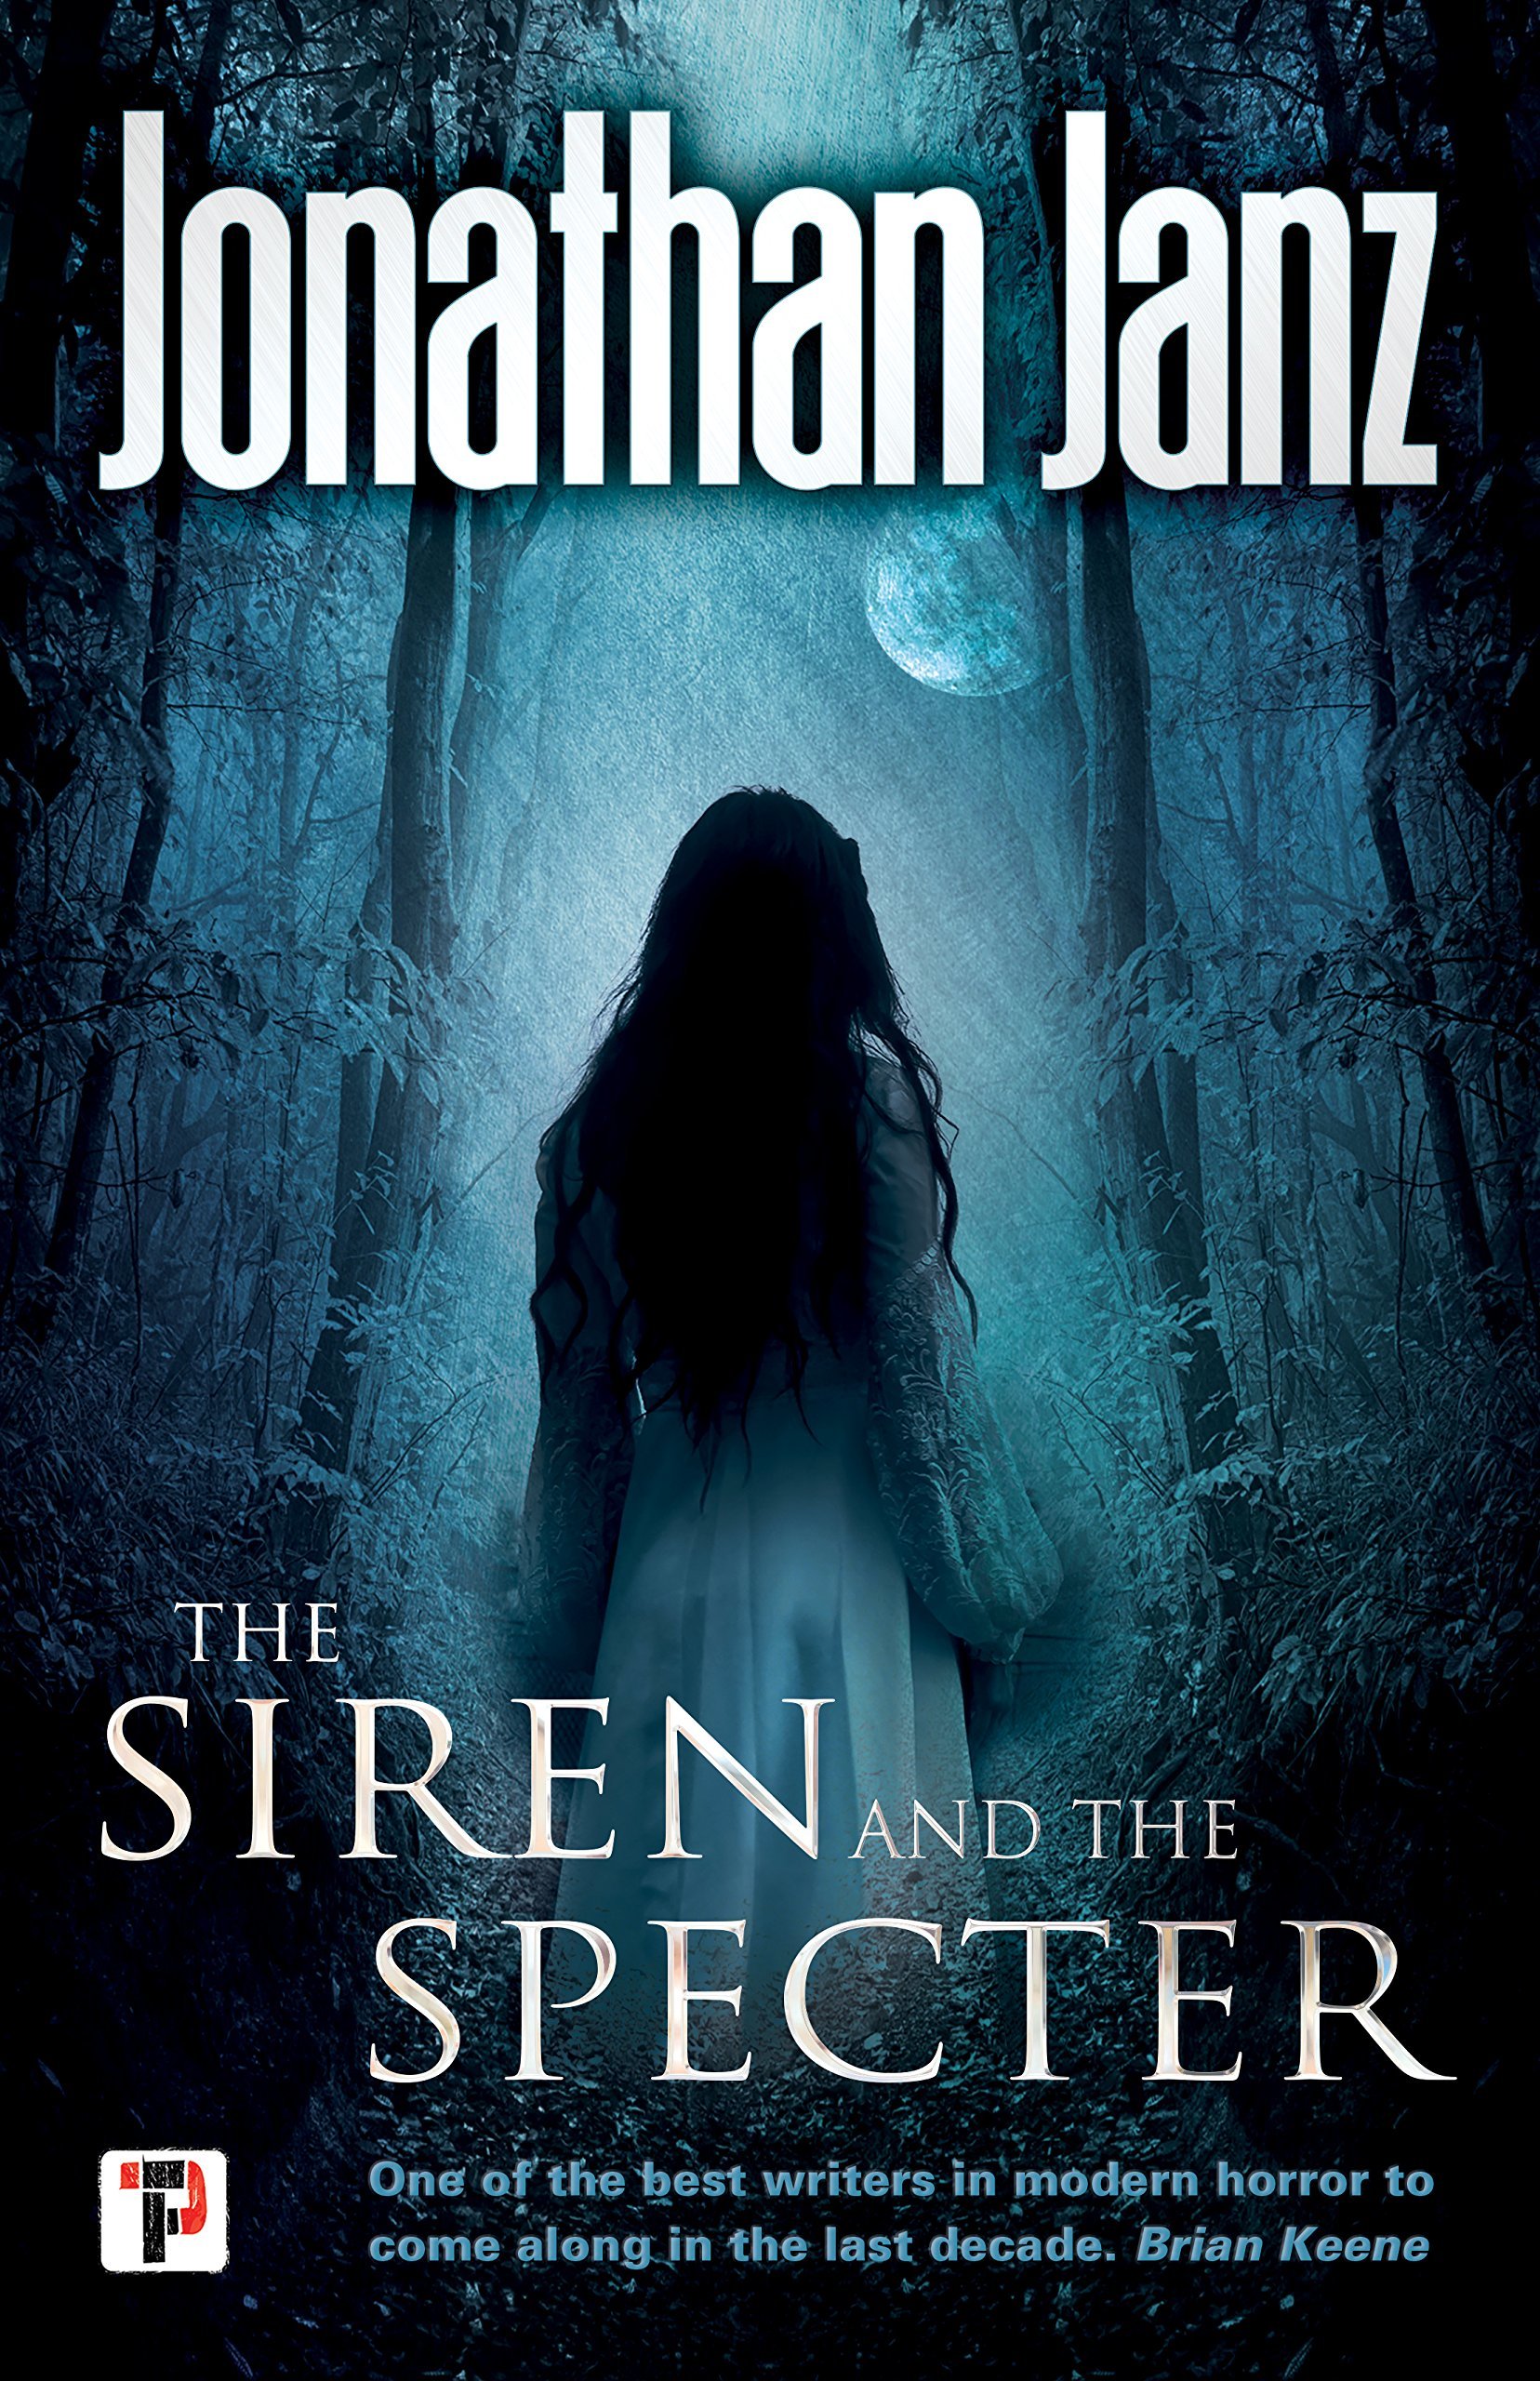 15. The Siren and the Specter by Jonathan Janz